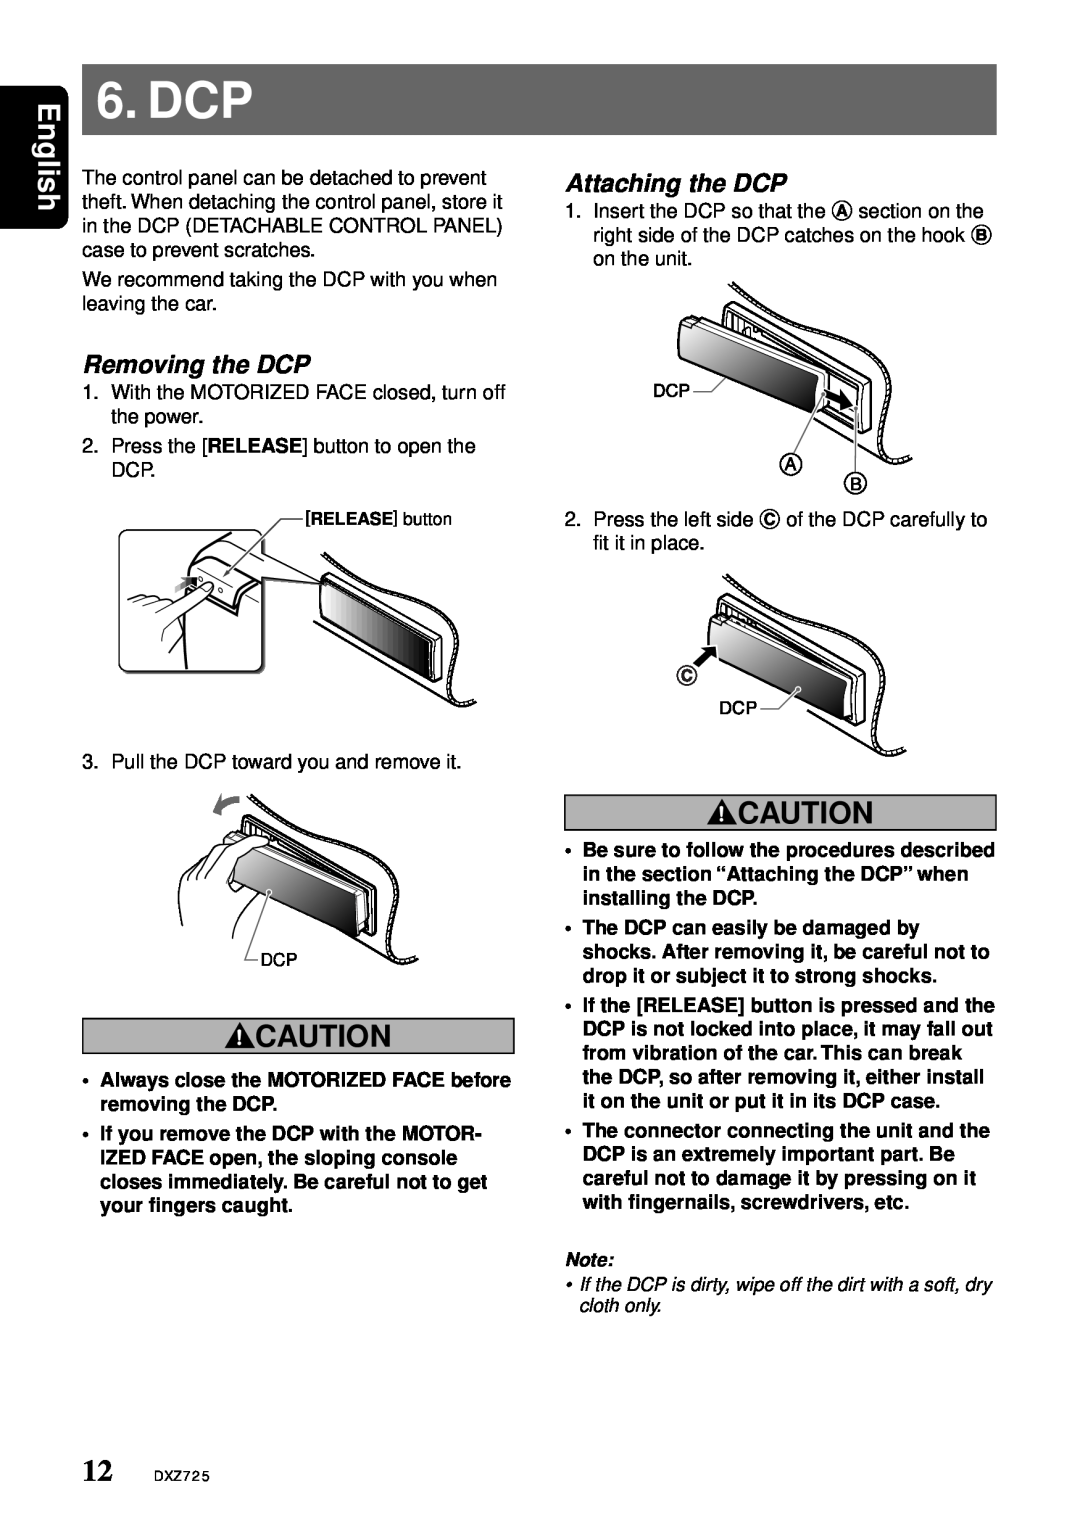 Clarion DXZ725 owner manual Dcp, English, Removing the DCP, Attaching the DCP 